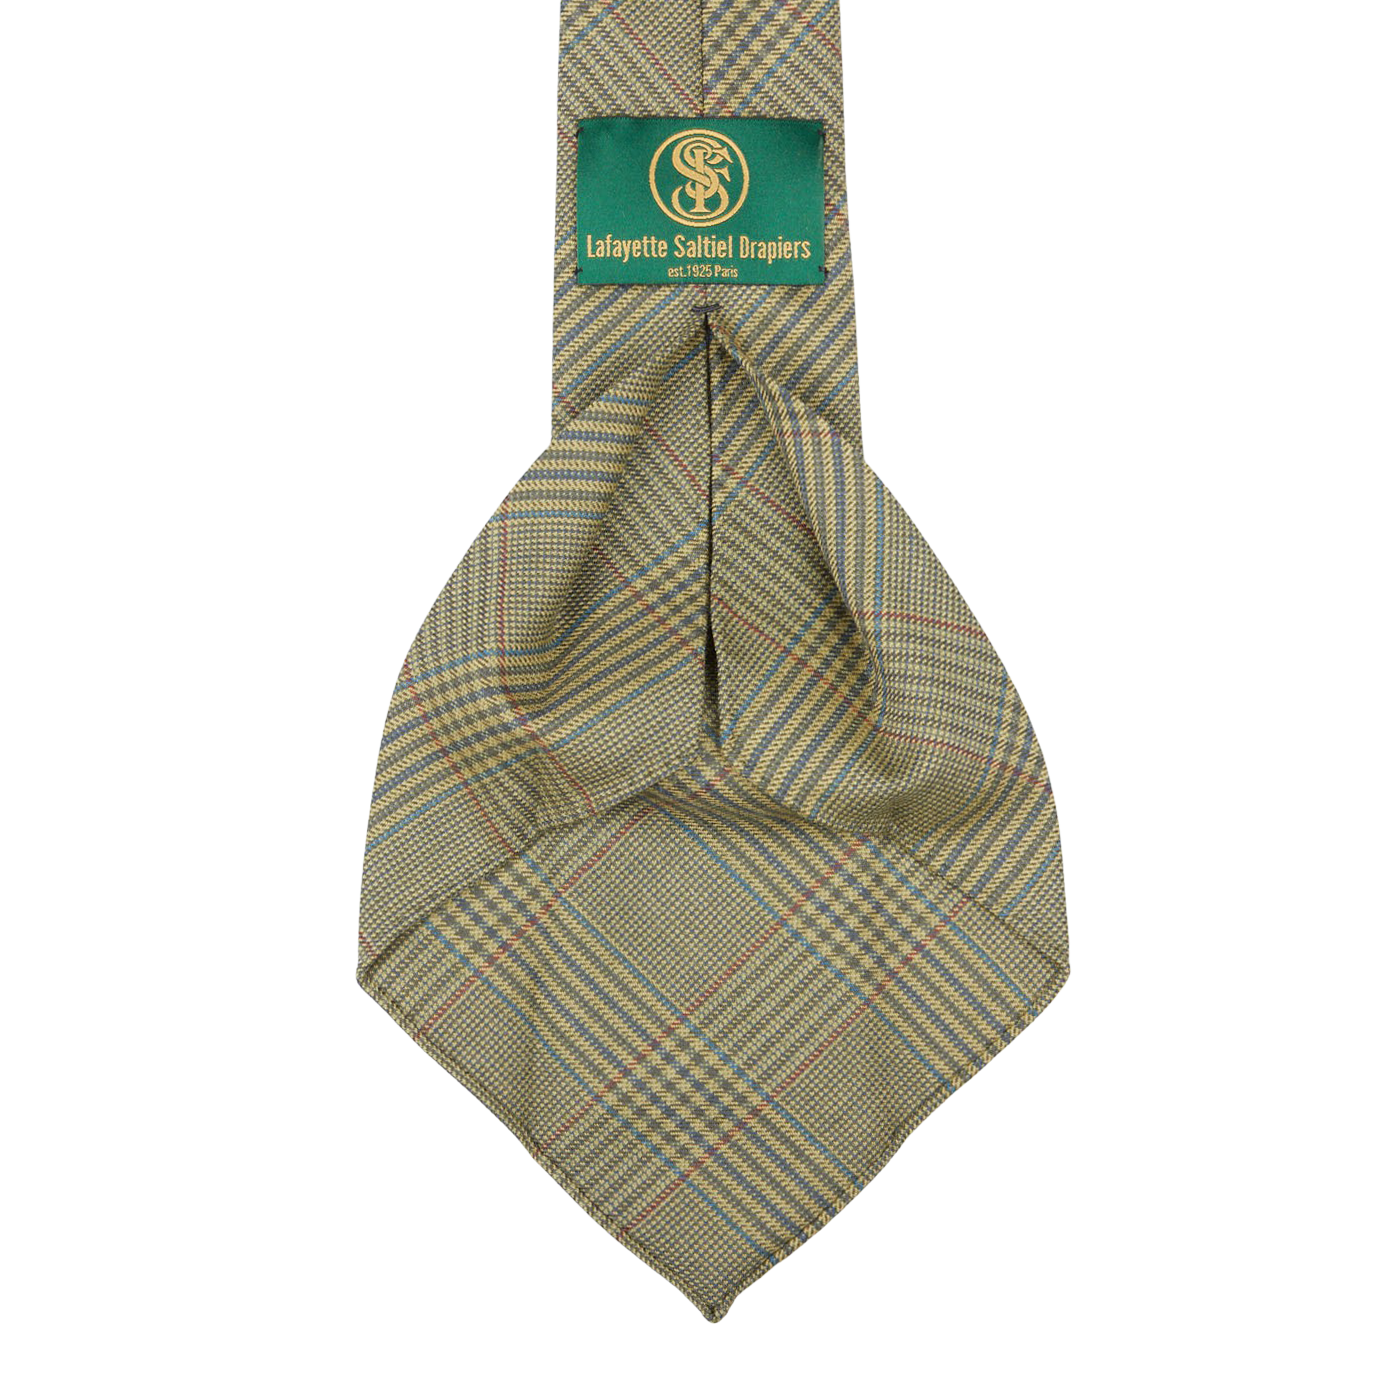 Dreaming of Monday Green Checked 7-Fold Vintage French Wool Tie Open